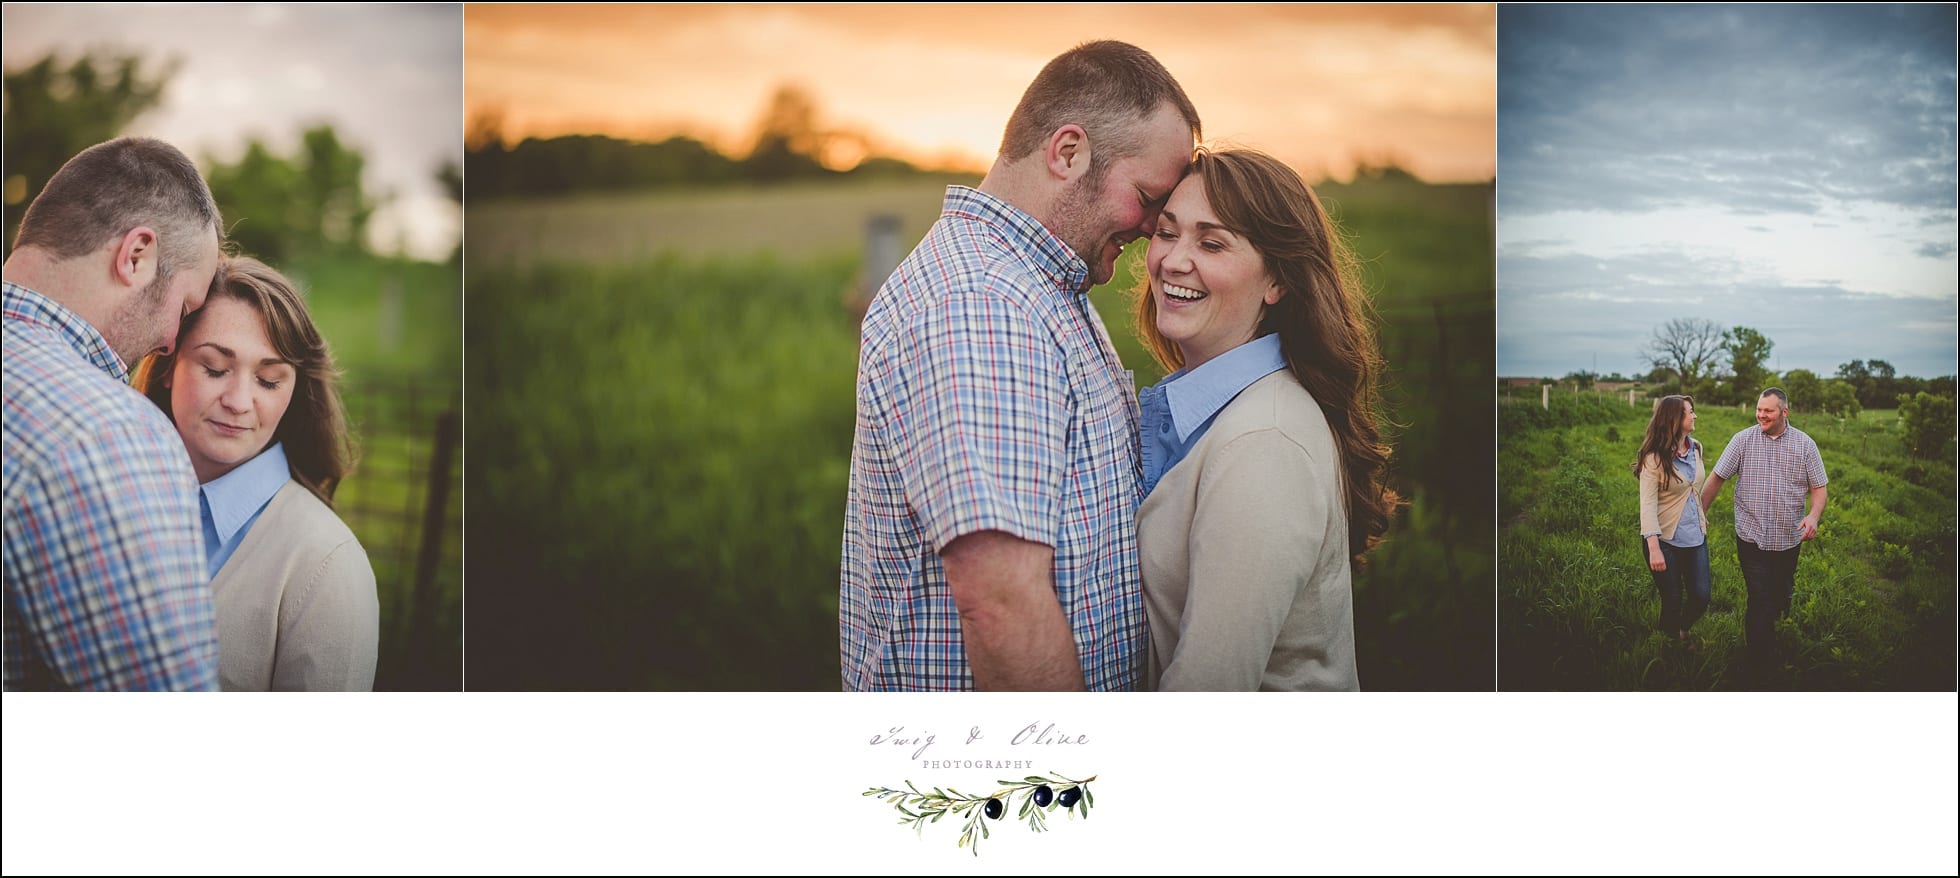 happy couples, farm fields, outdoors, darlington, sun prairie, wisconsin, twig and olive photography